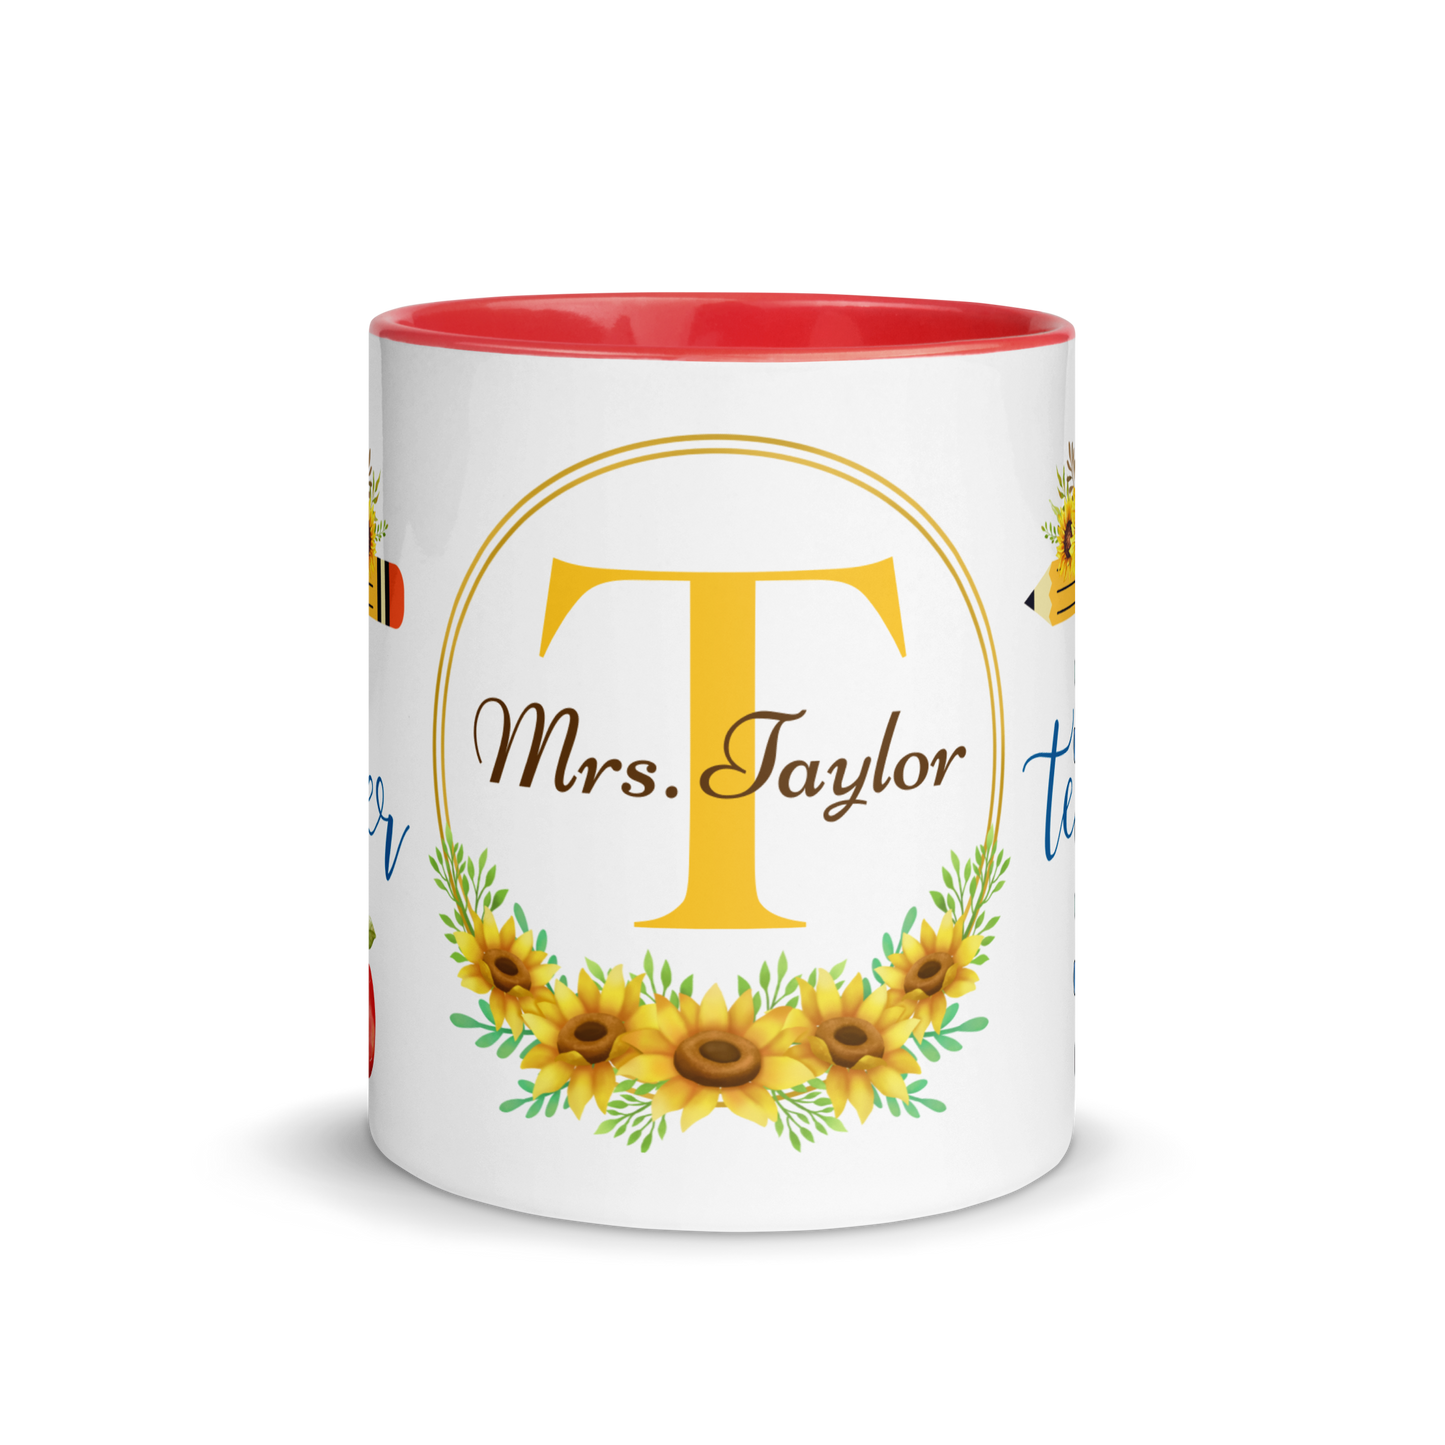 Personalized Coffee Mug 11oz | T is for Teacher Floral Themed